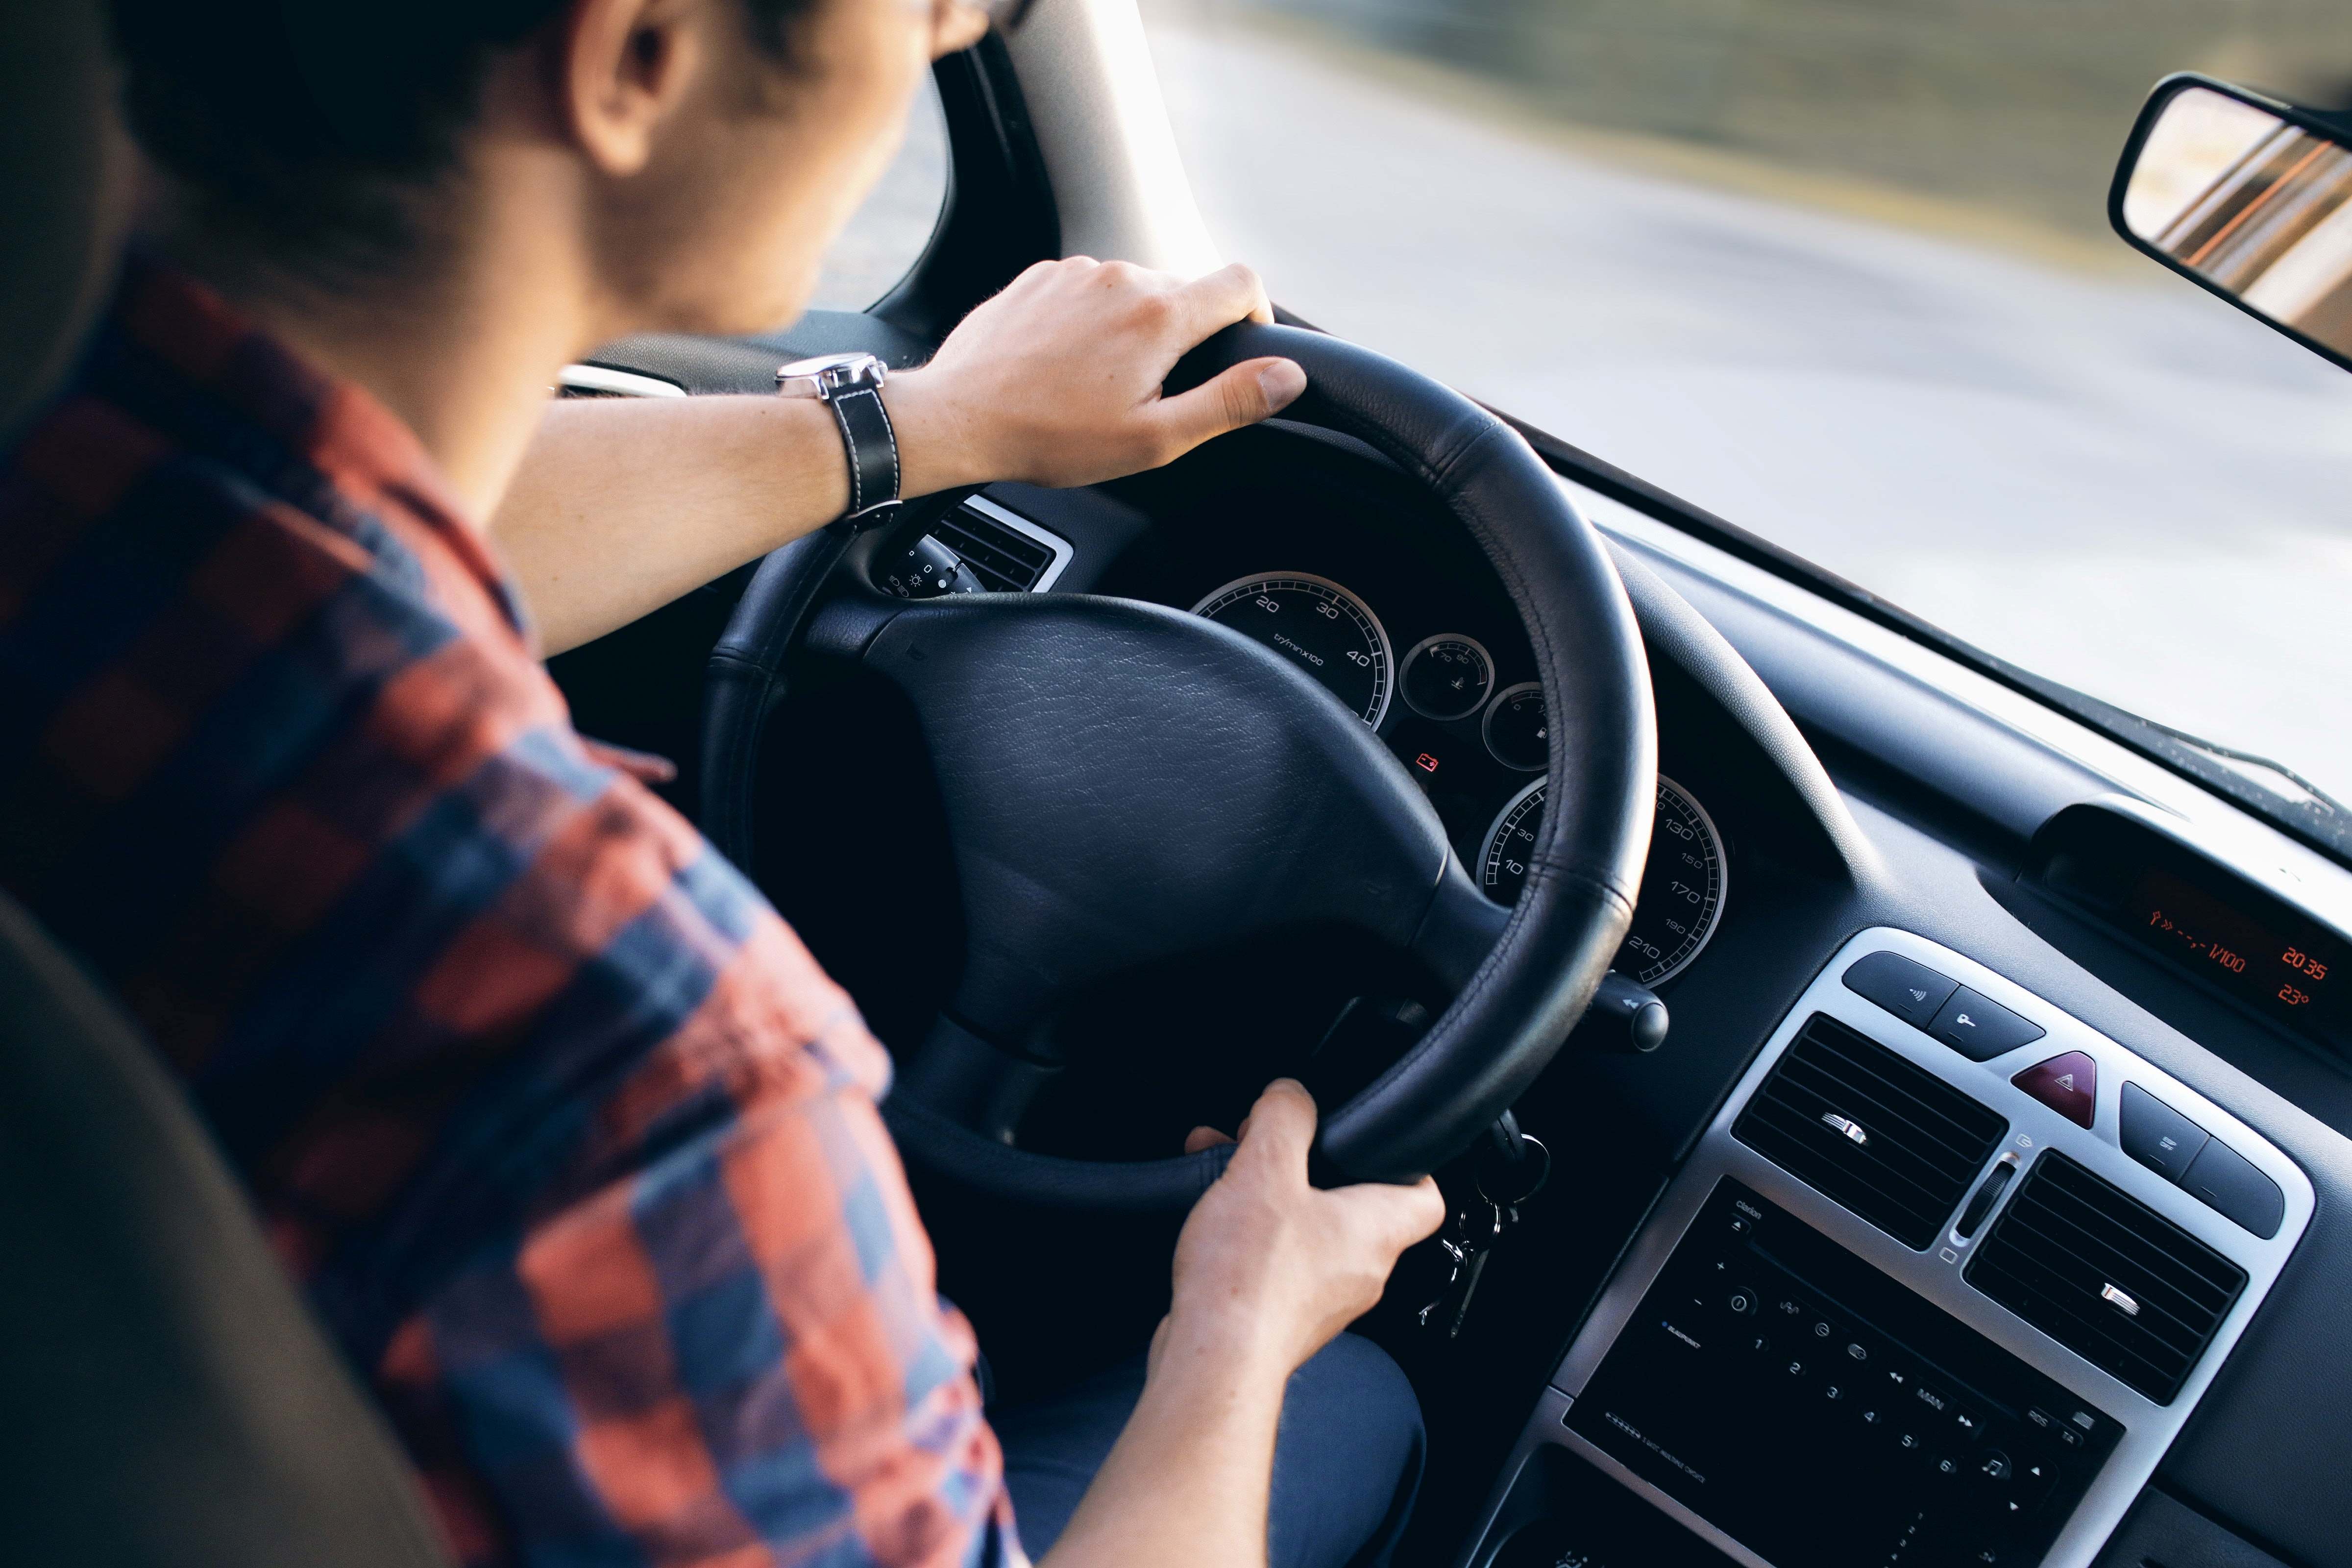 Stock image of person behind the wheel of a car.